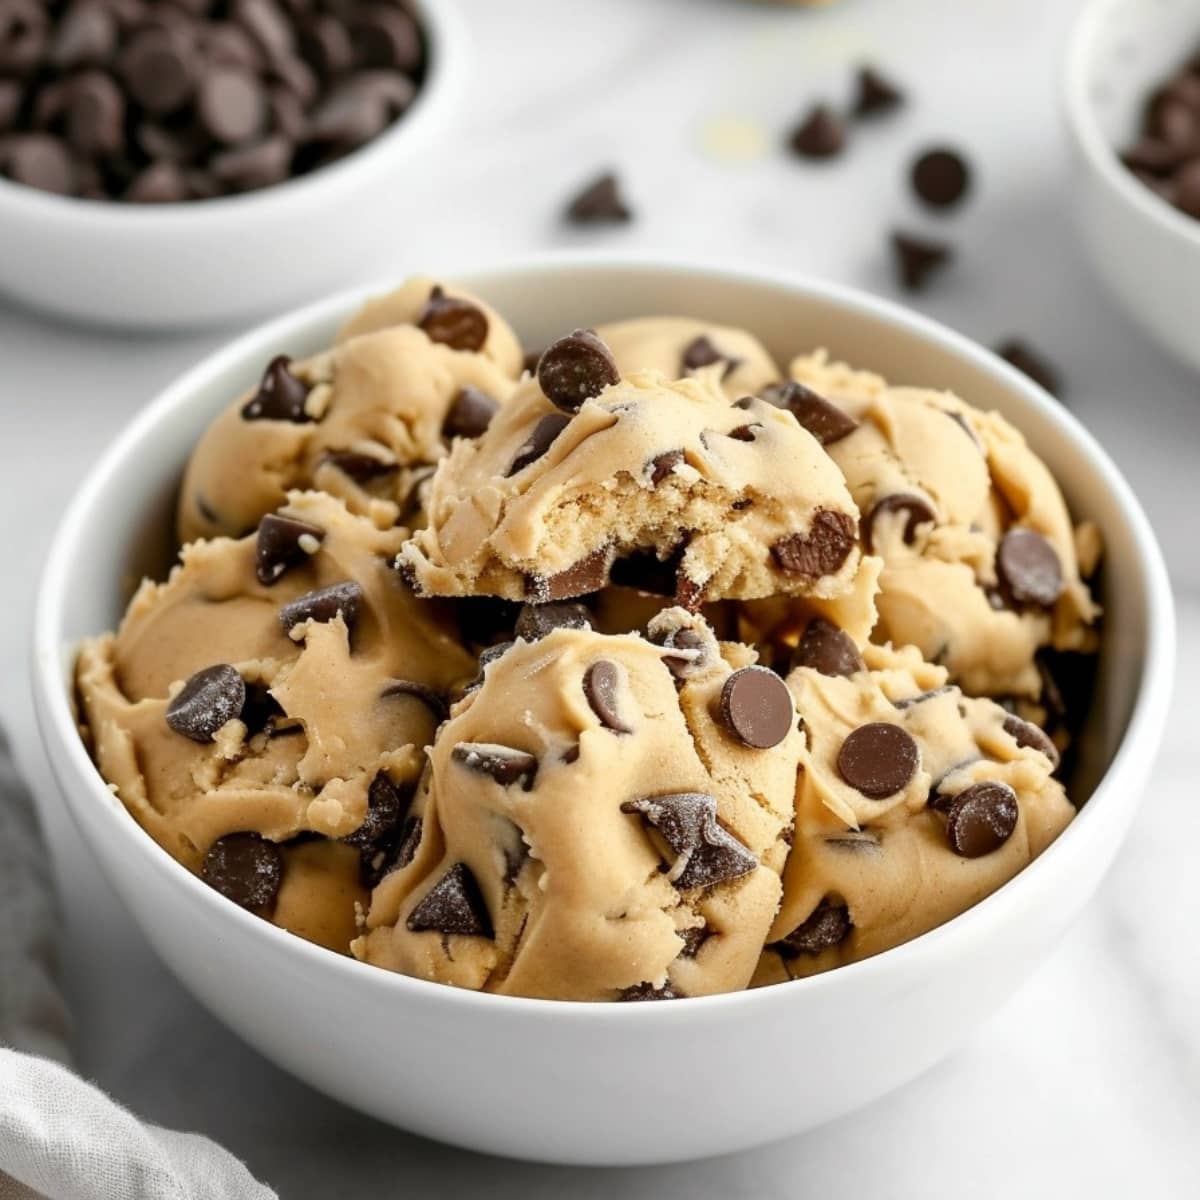 Bowl of edible cookie dough with chocolate chips